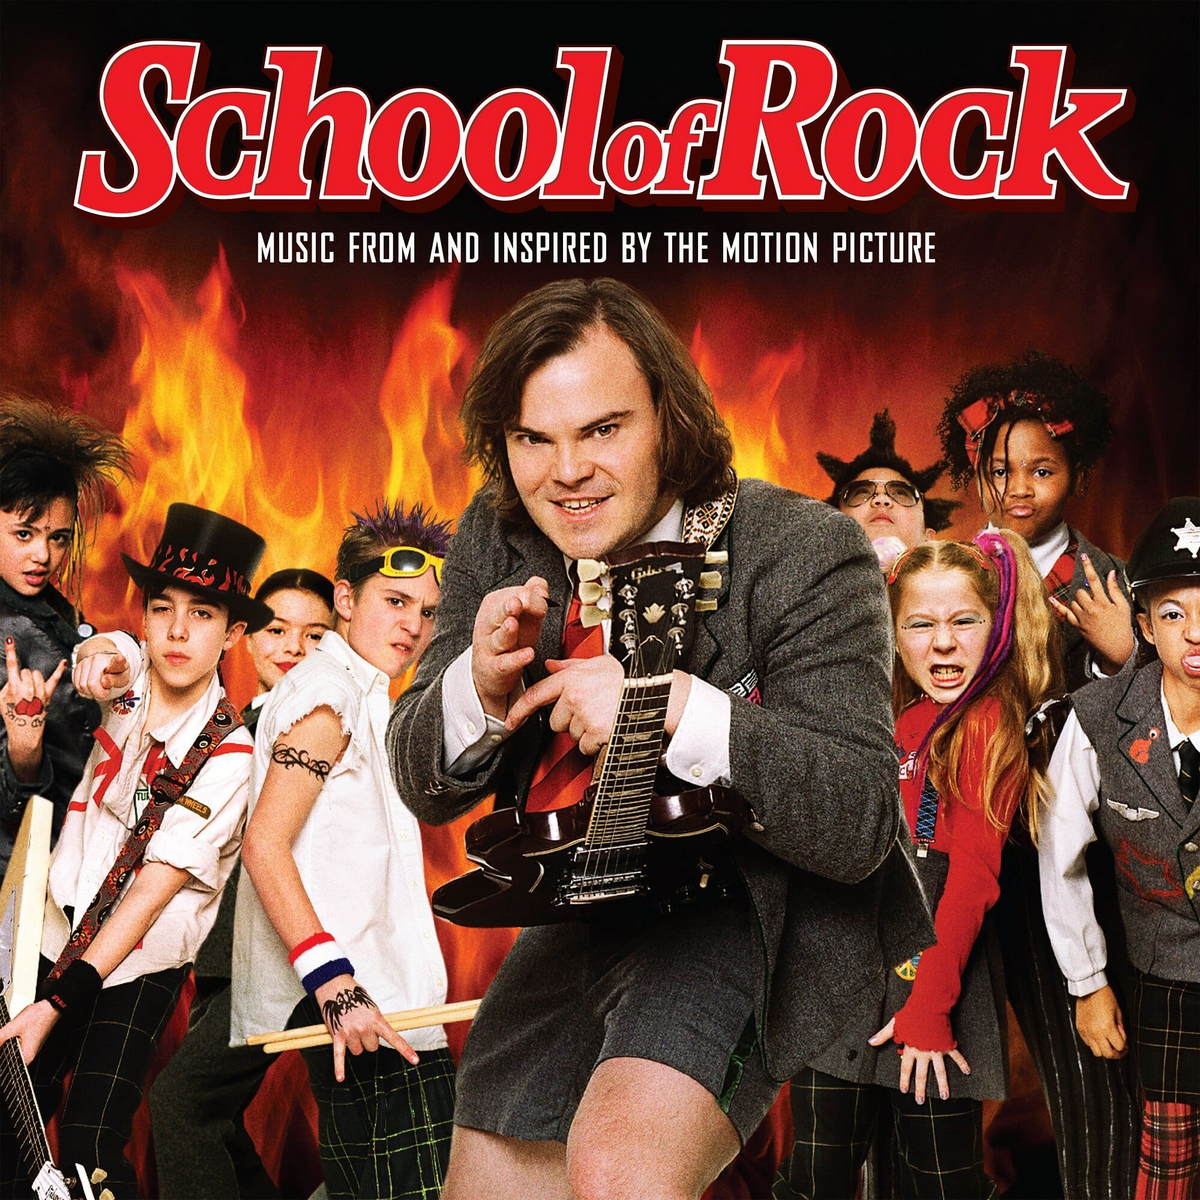 Саундтрек WM School of Rock (Music From And Inspired By The Motion Picture) (Rocktober 2021/Limited/Orange Vinyl) саундтрек music on vinyl ost deadpool 2 coloured vinyl lp